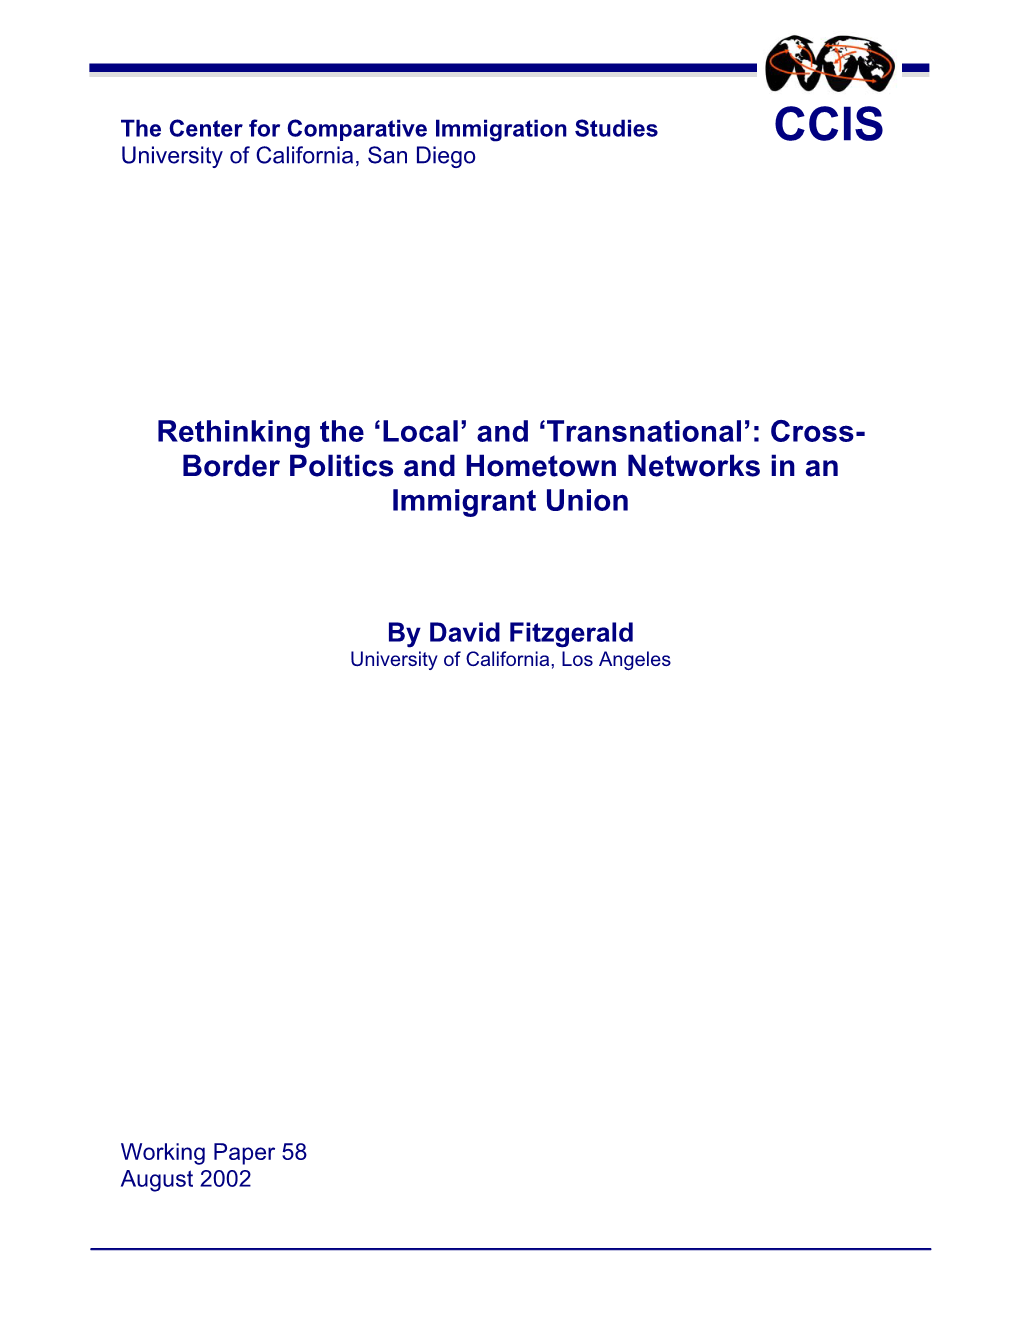 Transnational’: Cross- Border Politics and Hometown Networks in an Immigrant Union